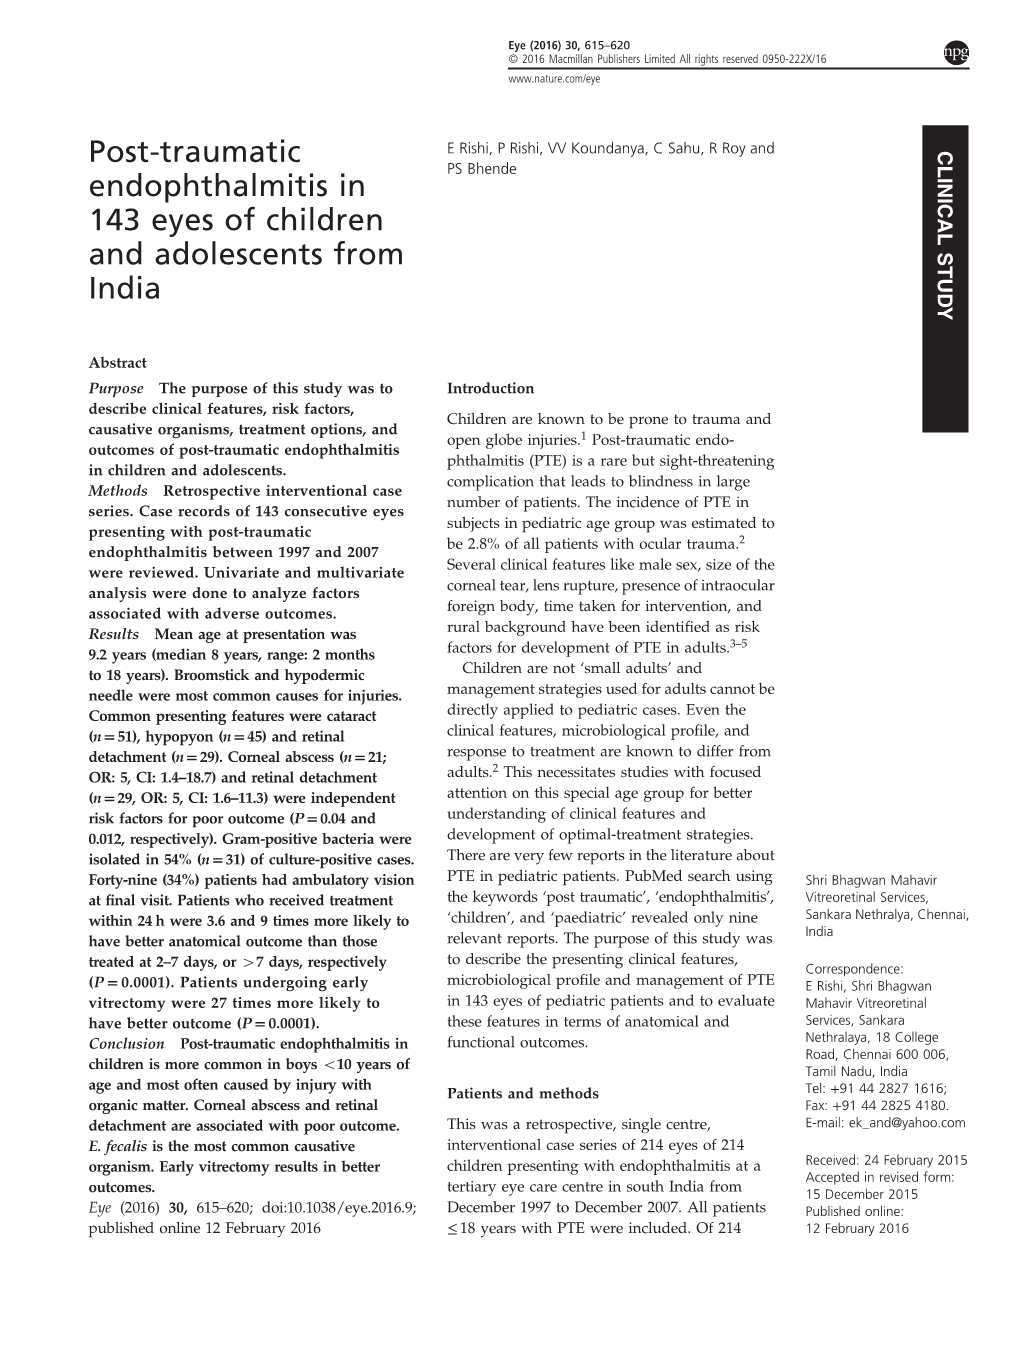 Post-Traumatic Endophthalmitis in 143 Eyes of Children and Adolescents from India: Baseline Characteristics and Adolescents from India: Microbiological Proﬁle